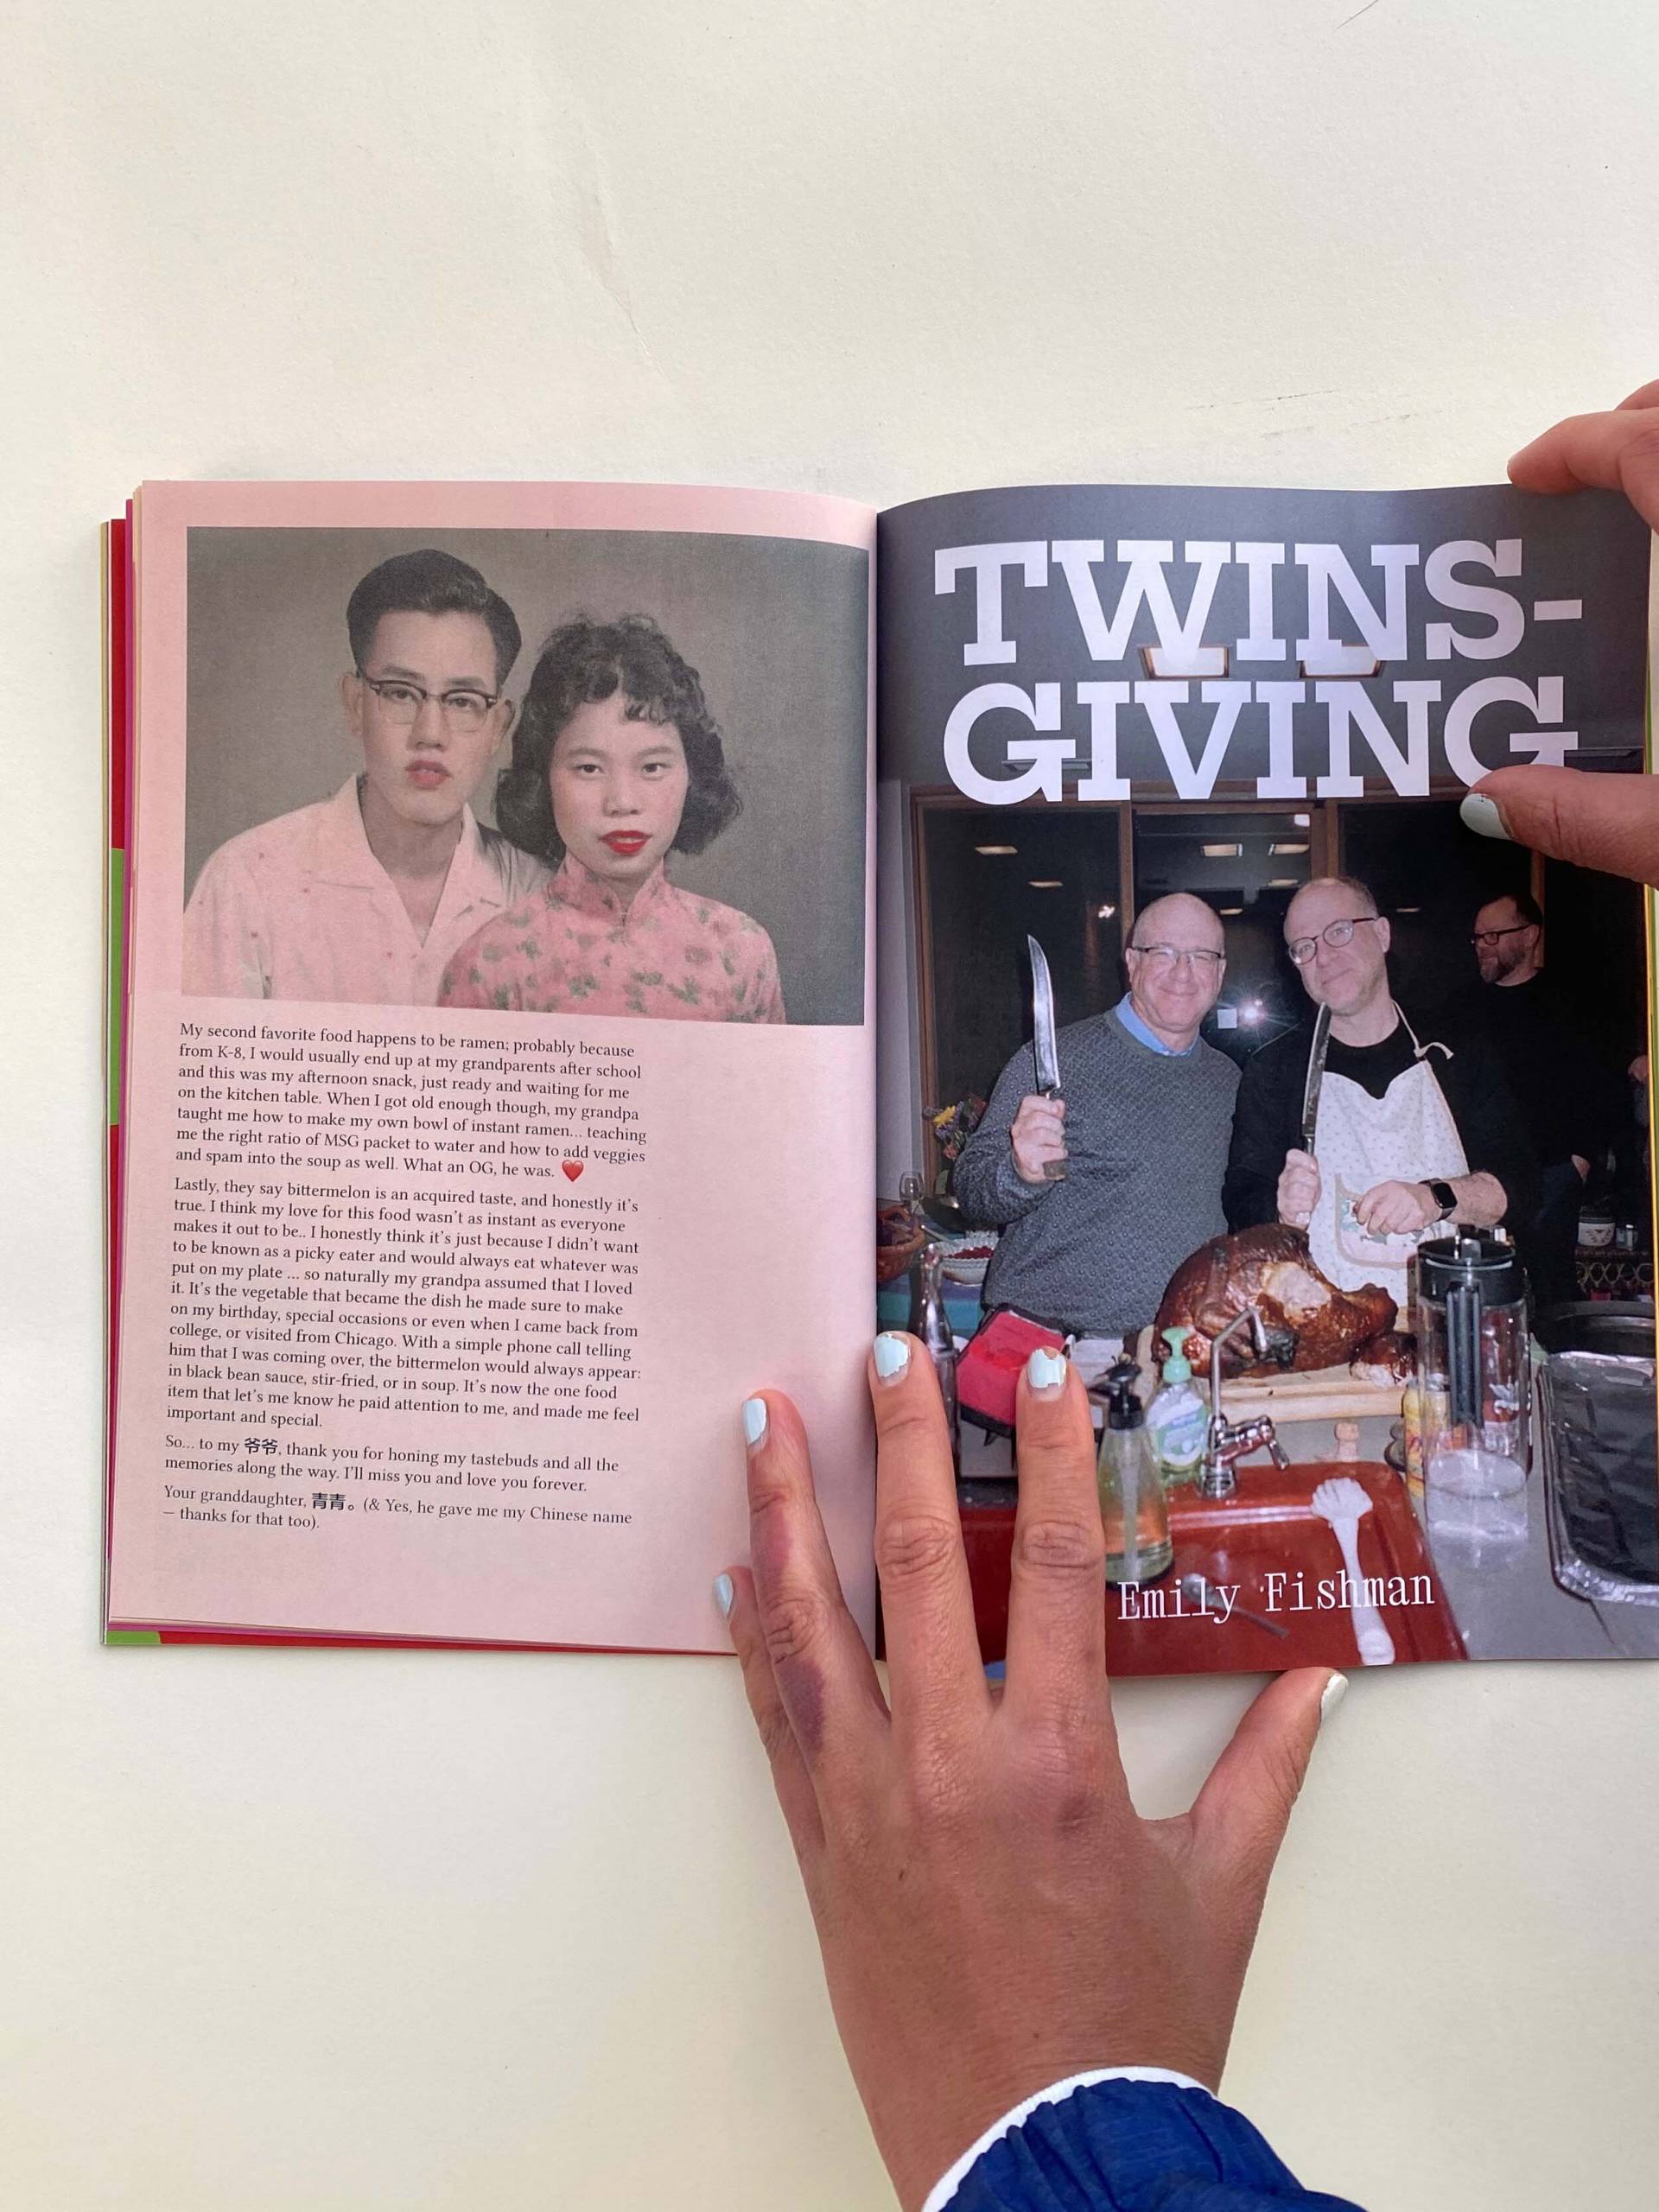 The zine open to a spread that shows an vintage photo of an Asian couple on one side and the beginning of a photo essay called "Twinsgiving" on the other.